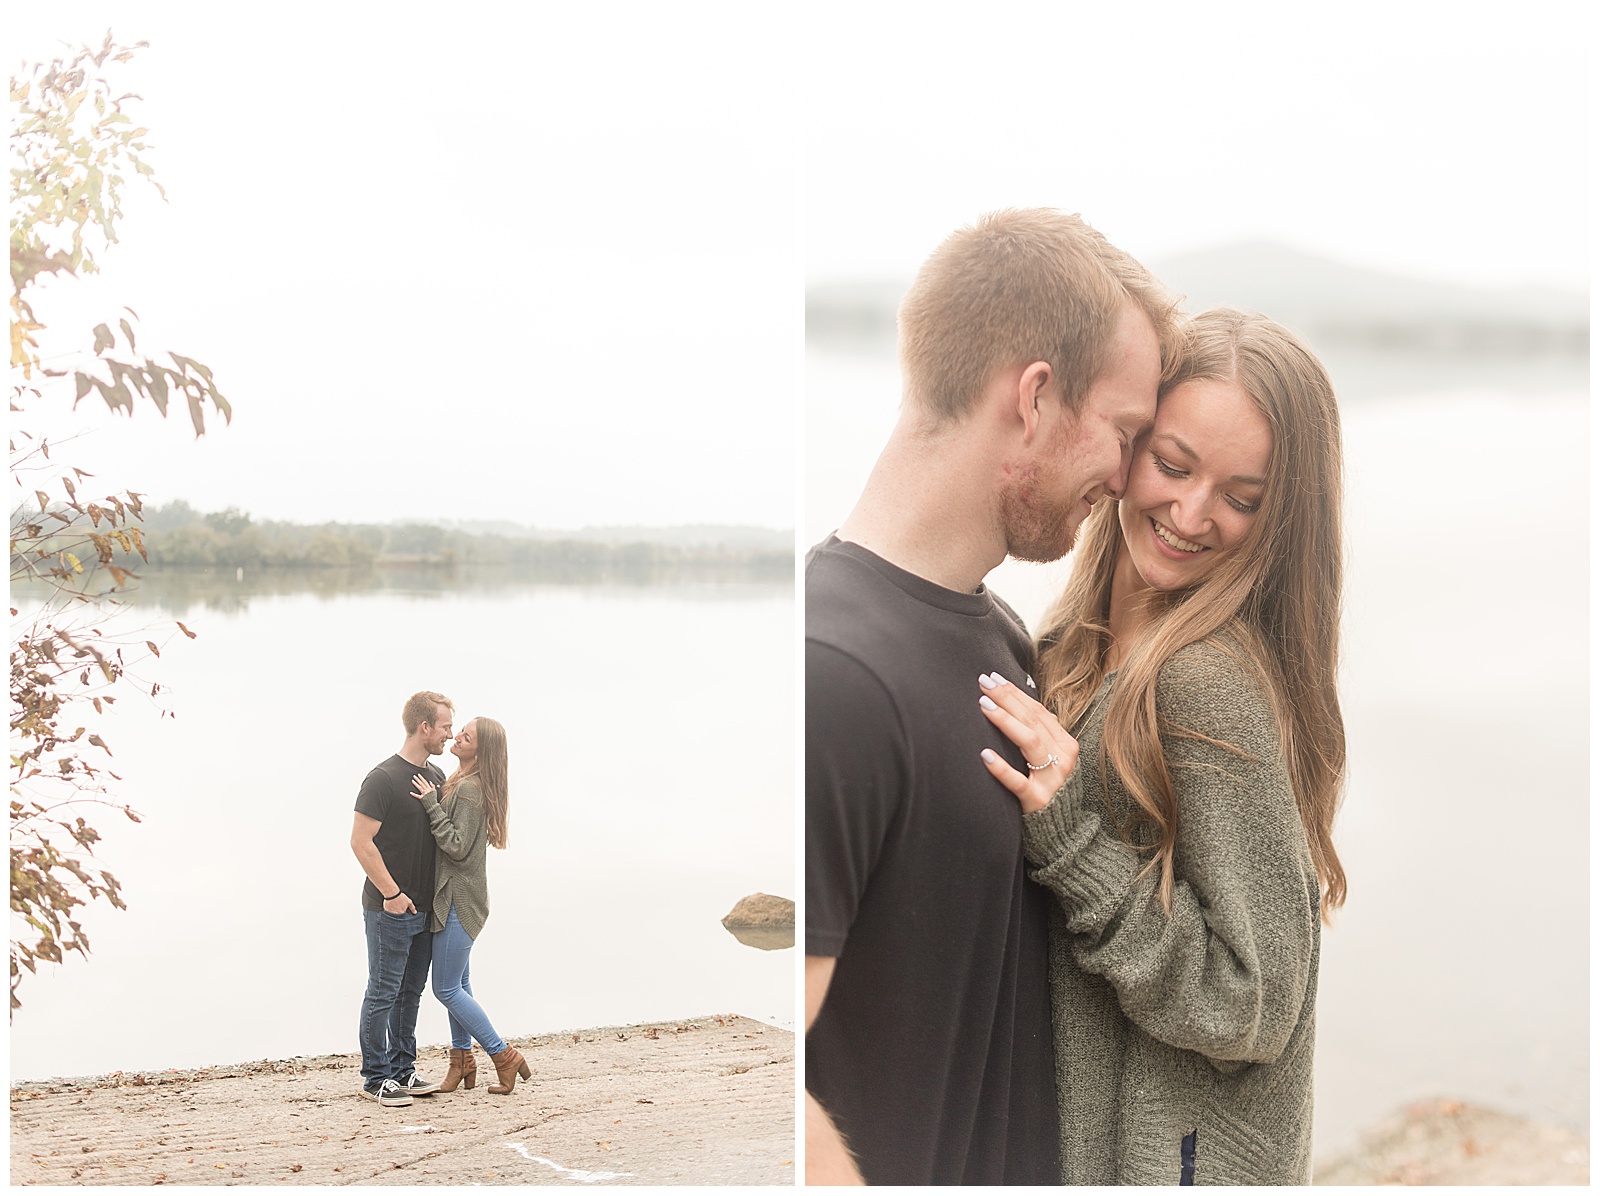 engaged couple hugging and smiling by lake on cloudy fall day with row of trees in background